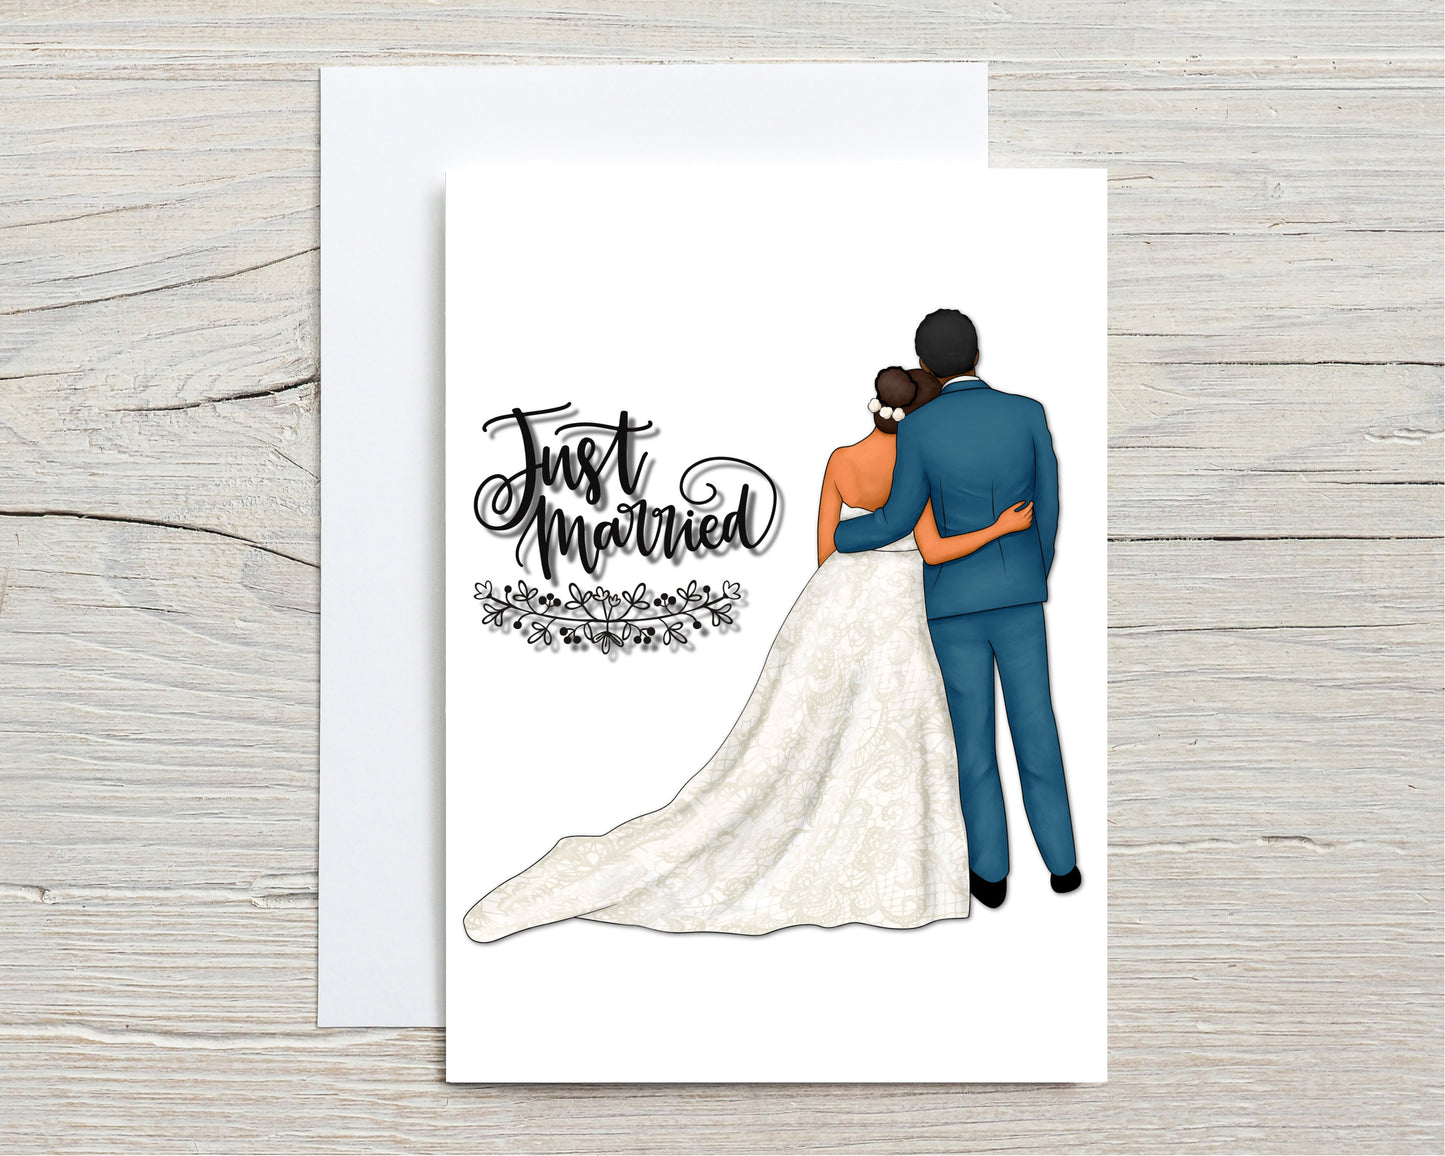 Just Married Black Couple Interracial Couples Newlywed Cards for Weddings